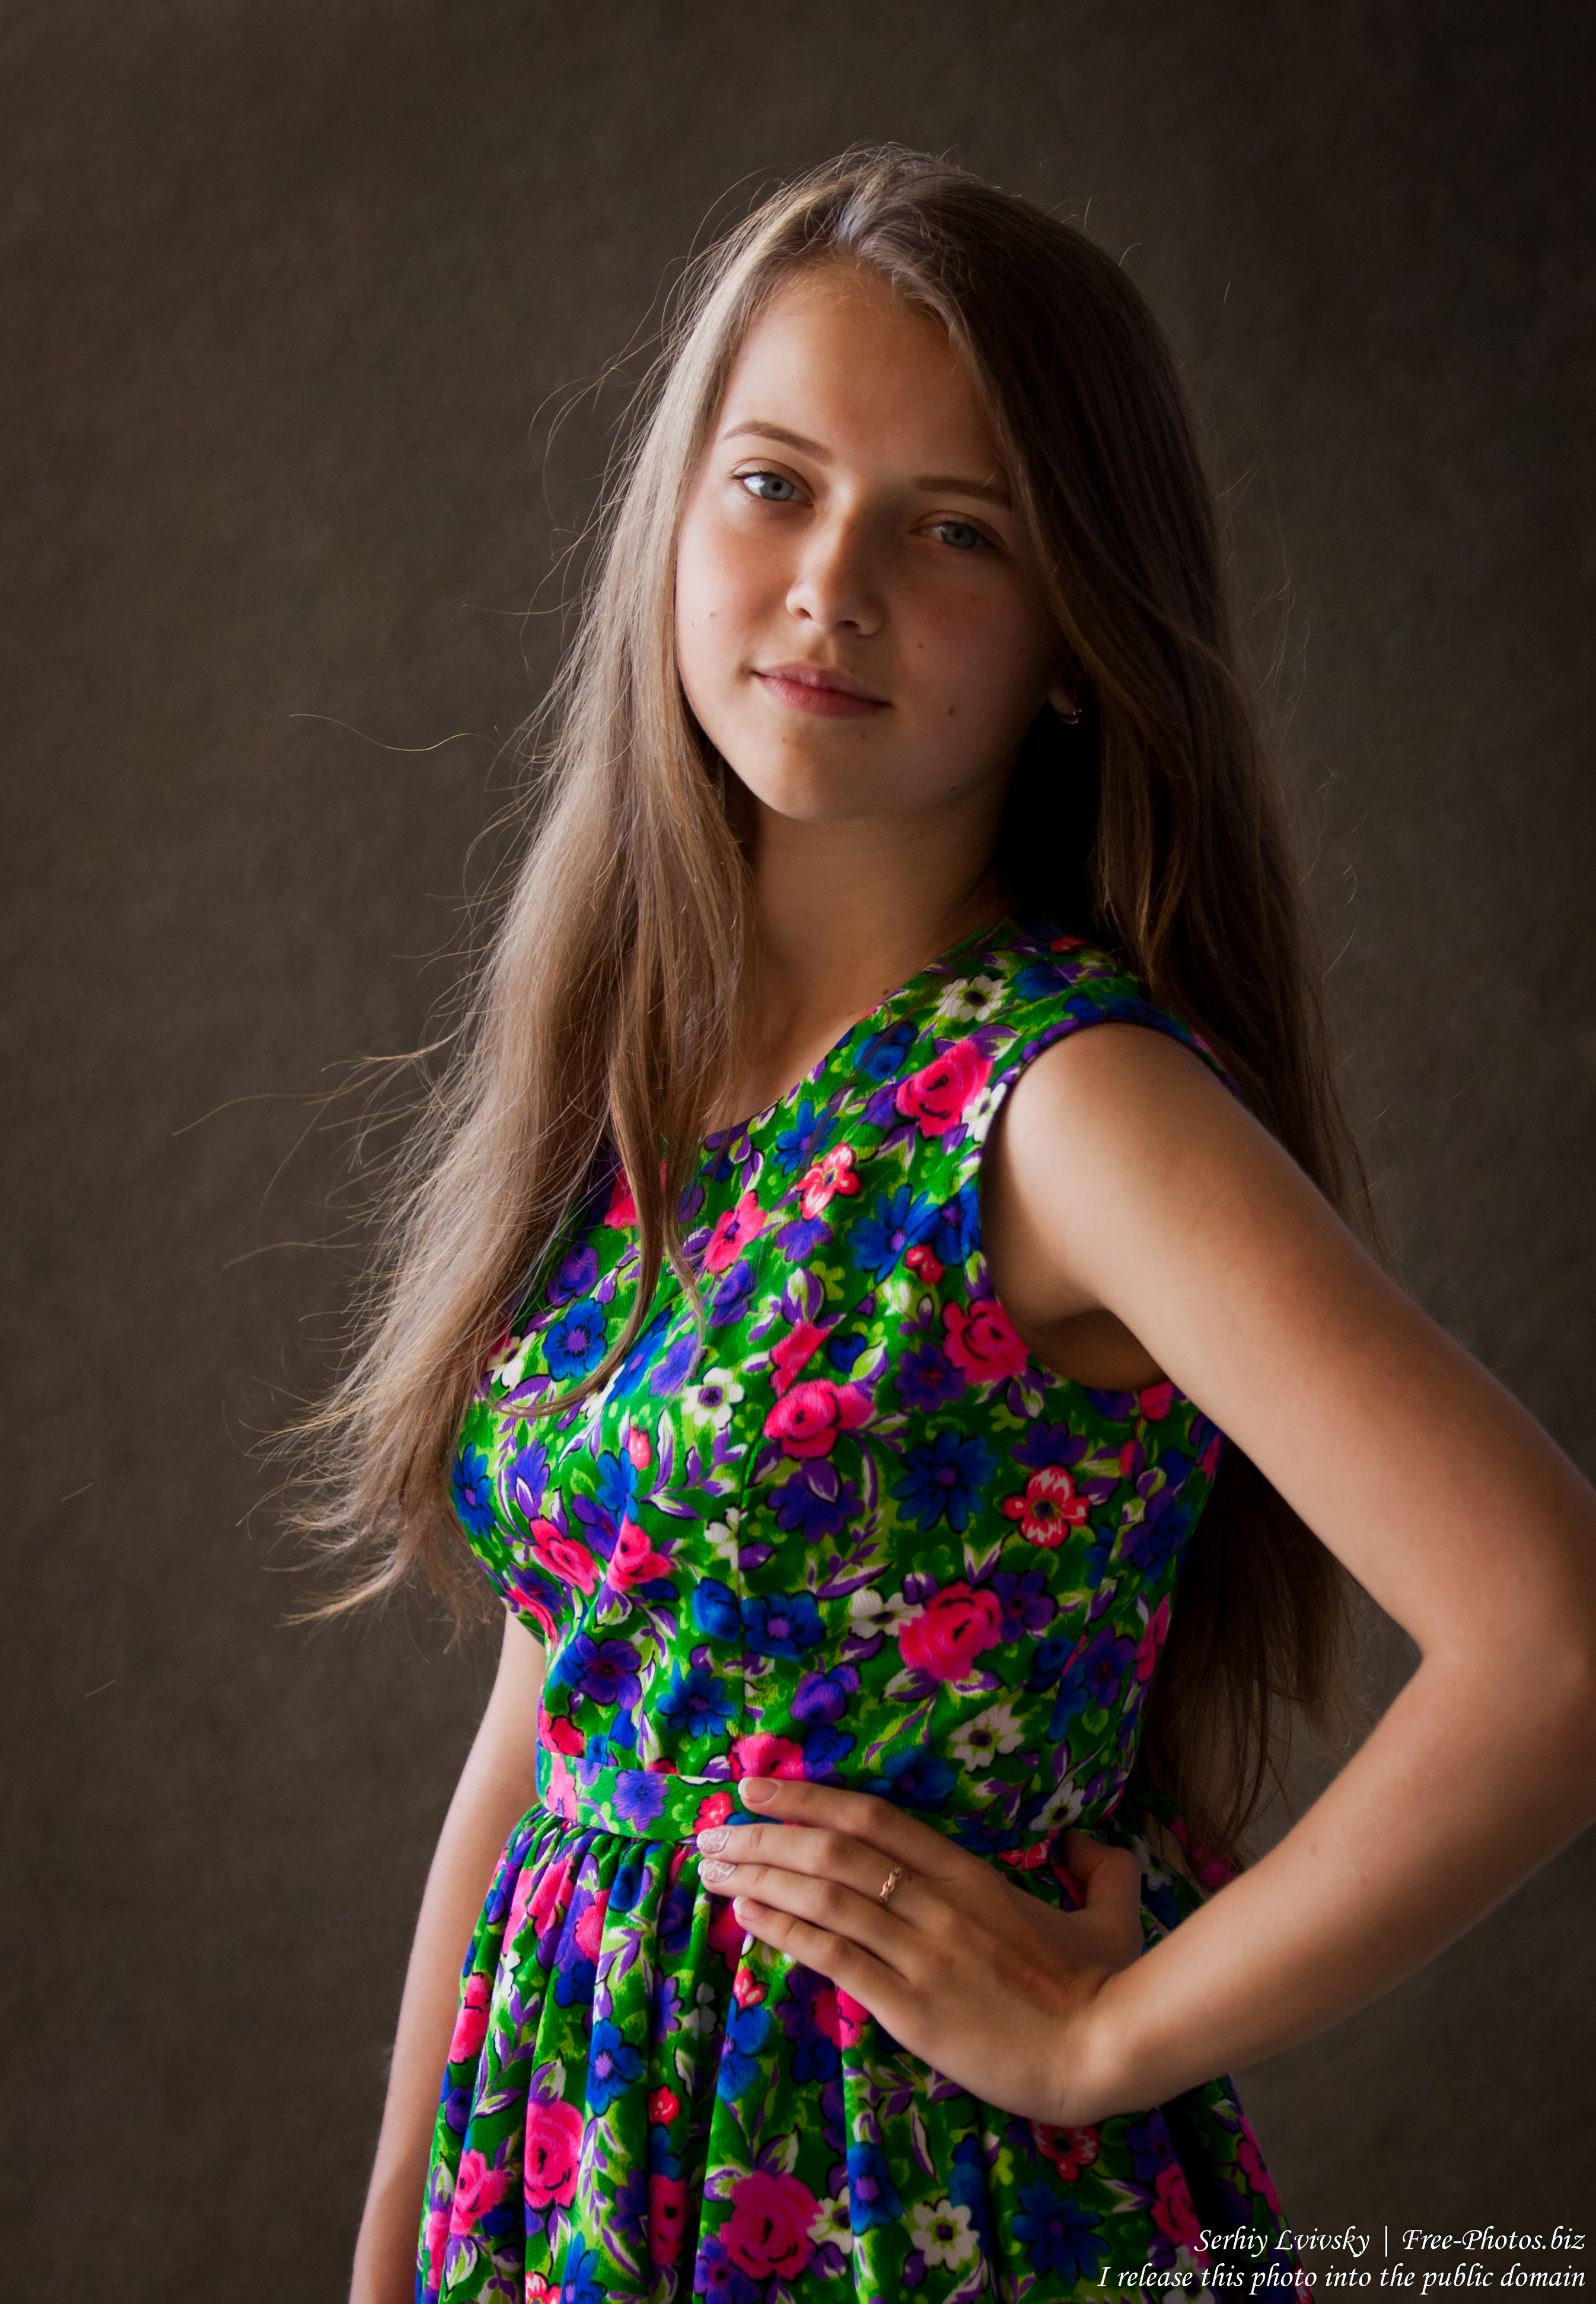 Photo of a cute 15-year old girl photographed in July 2015 ...